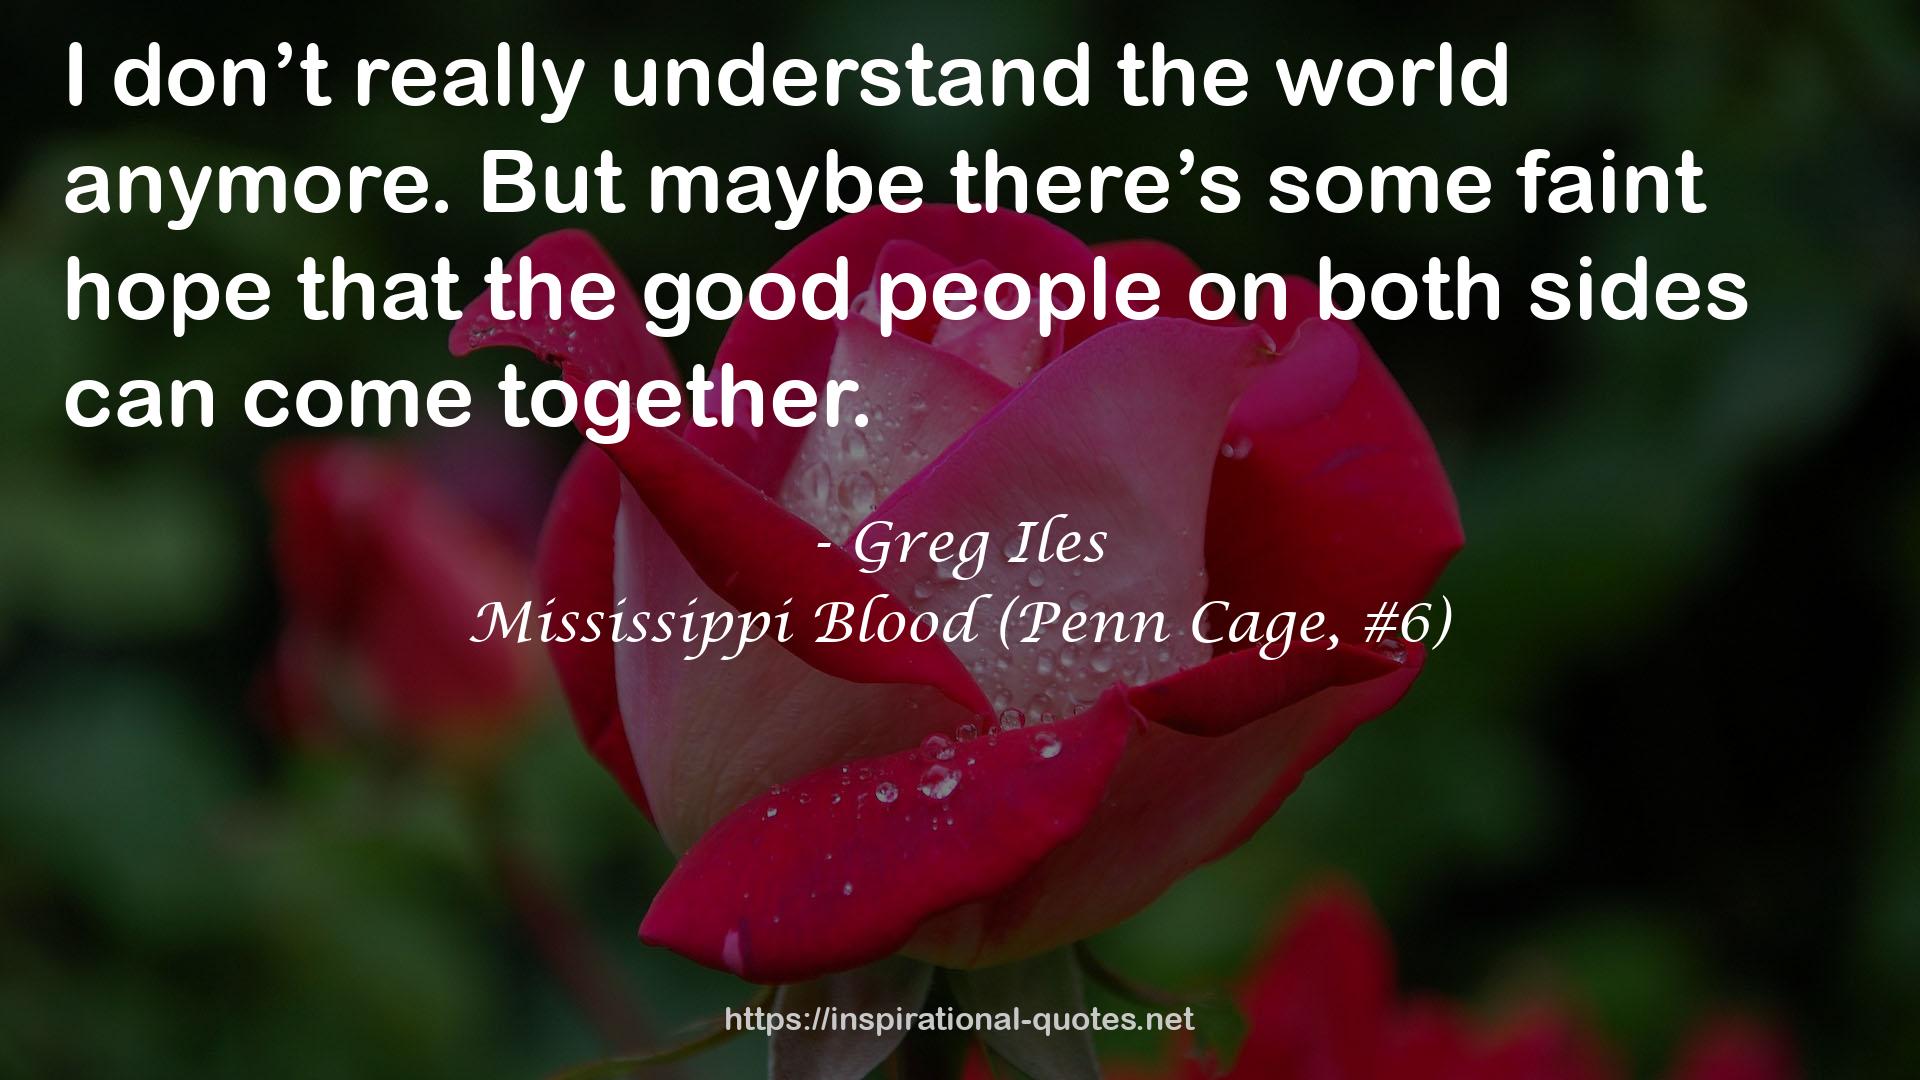 Mississippi Blood (Penn Cage, #6) QUOTES